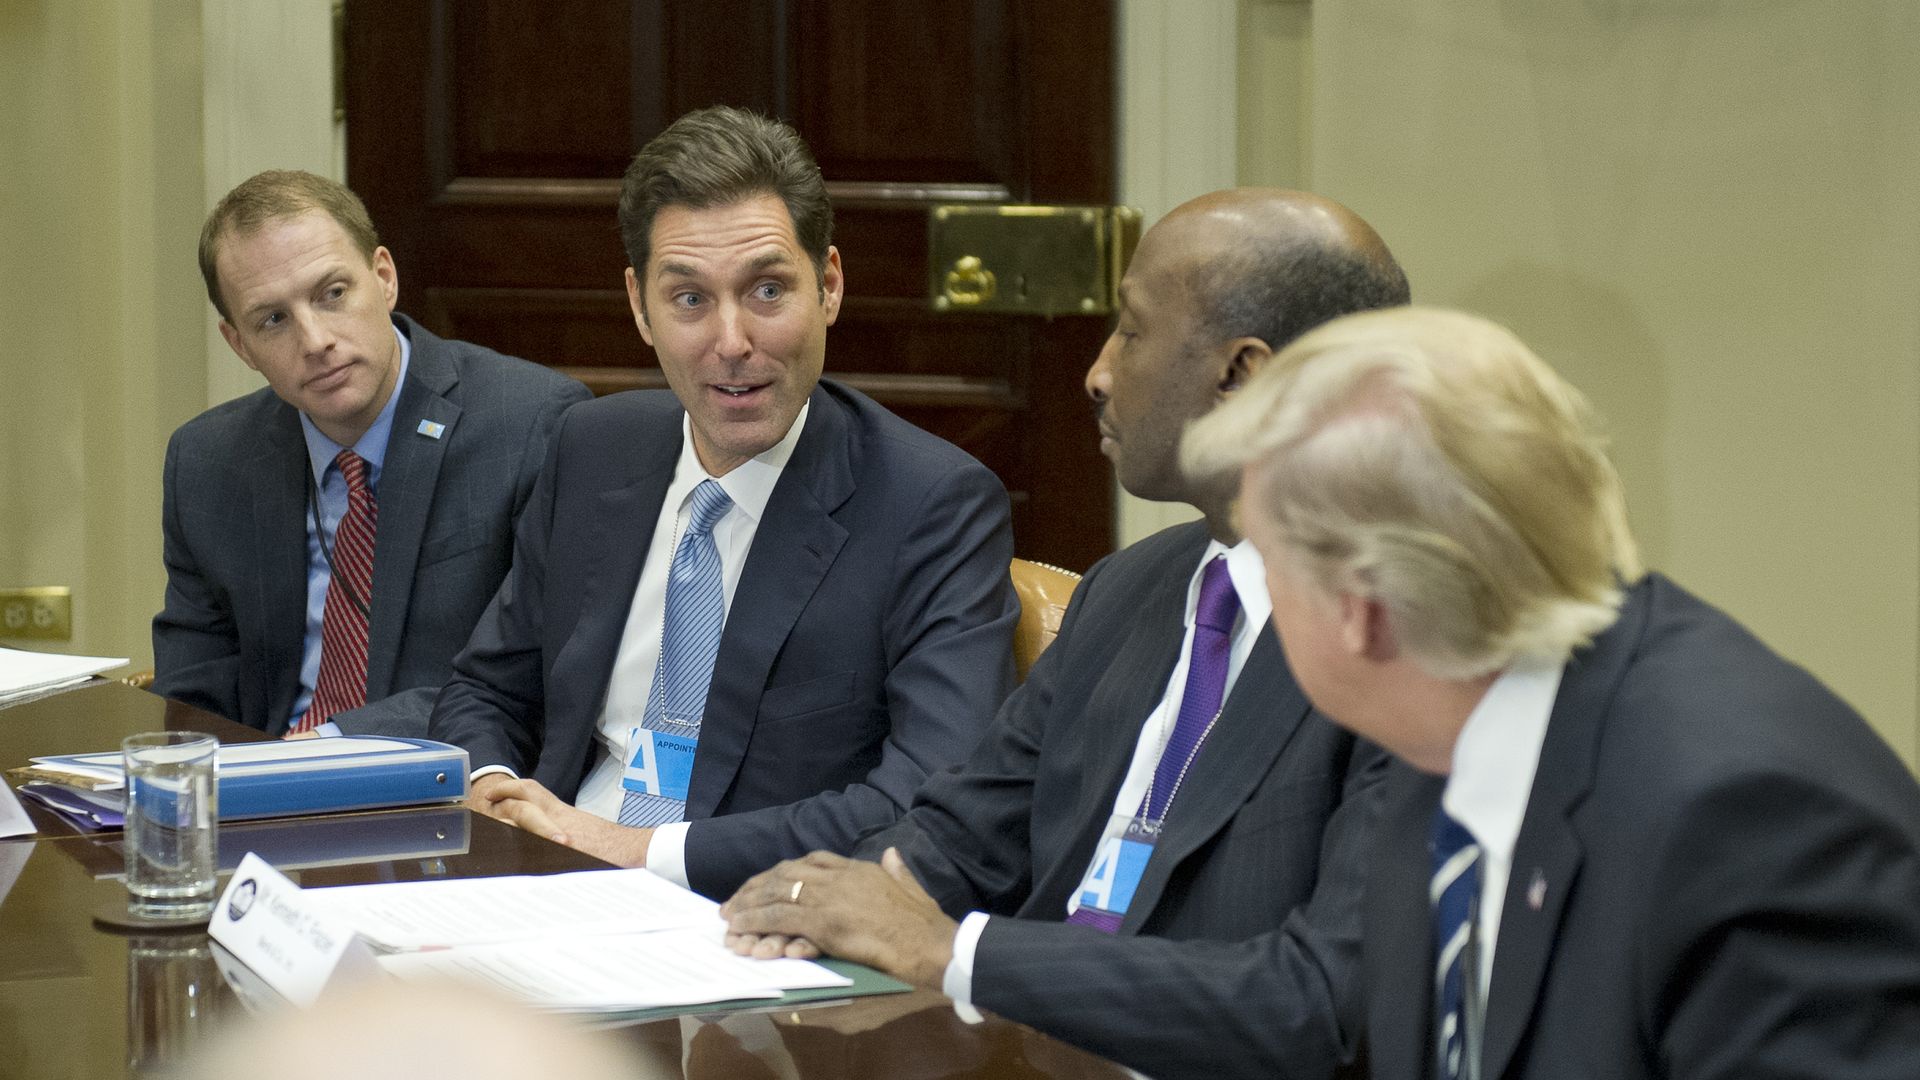 PhRMA CEO Stephen Ubl speaks a table with President Trump.